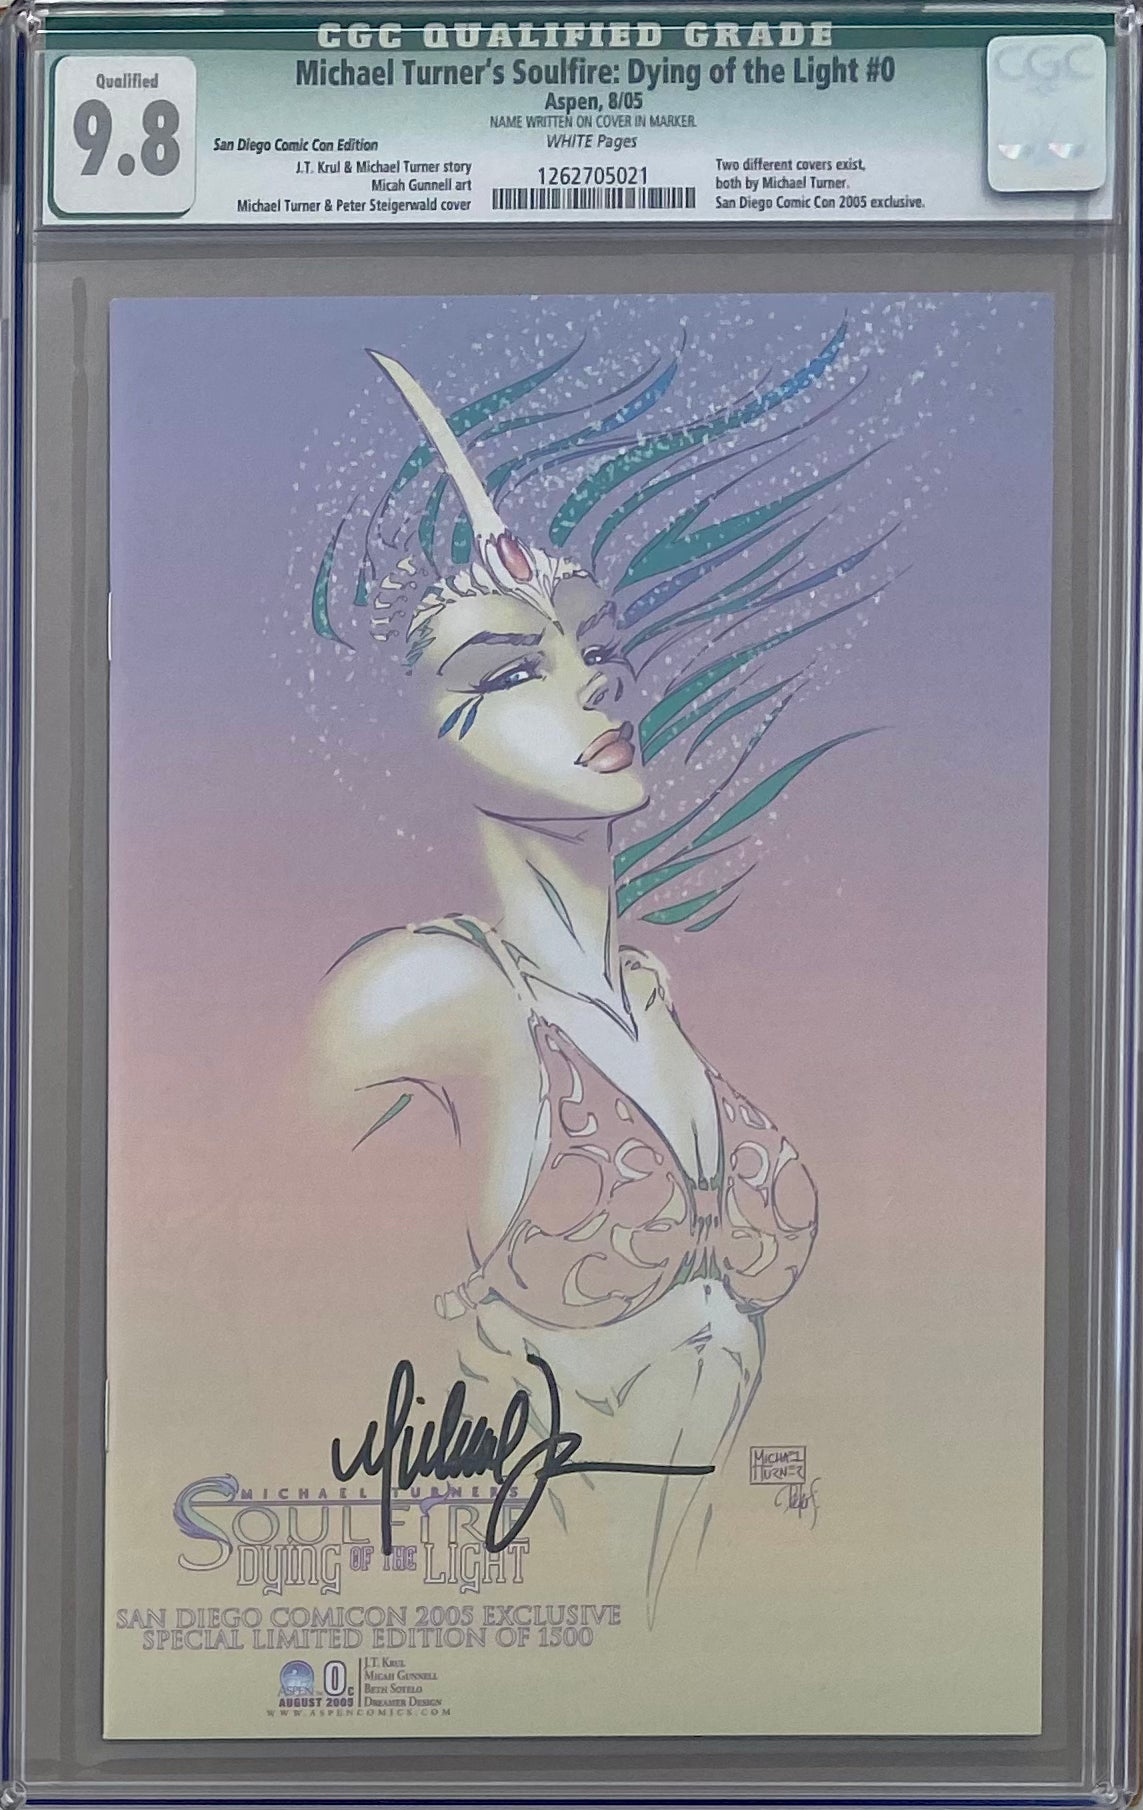 Michael Turner's Soulfire: Dying of the Light #0 San Diego Comic Con Edition CGC 9.8 Qualified